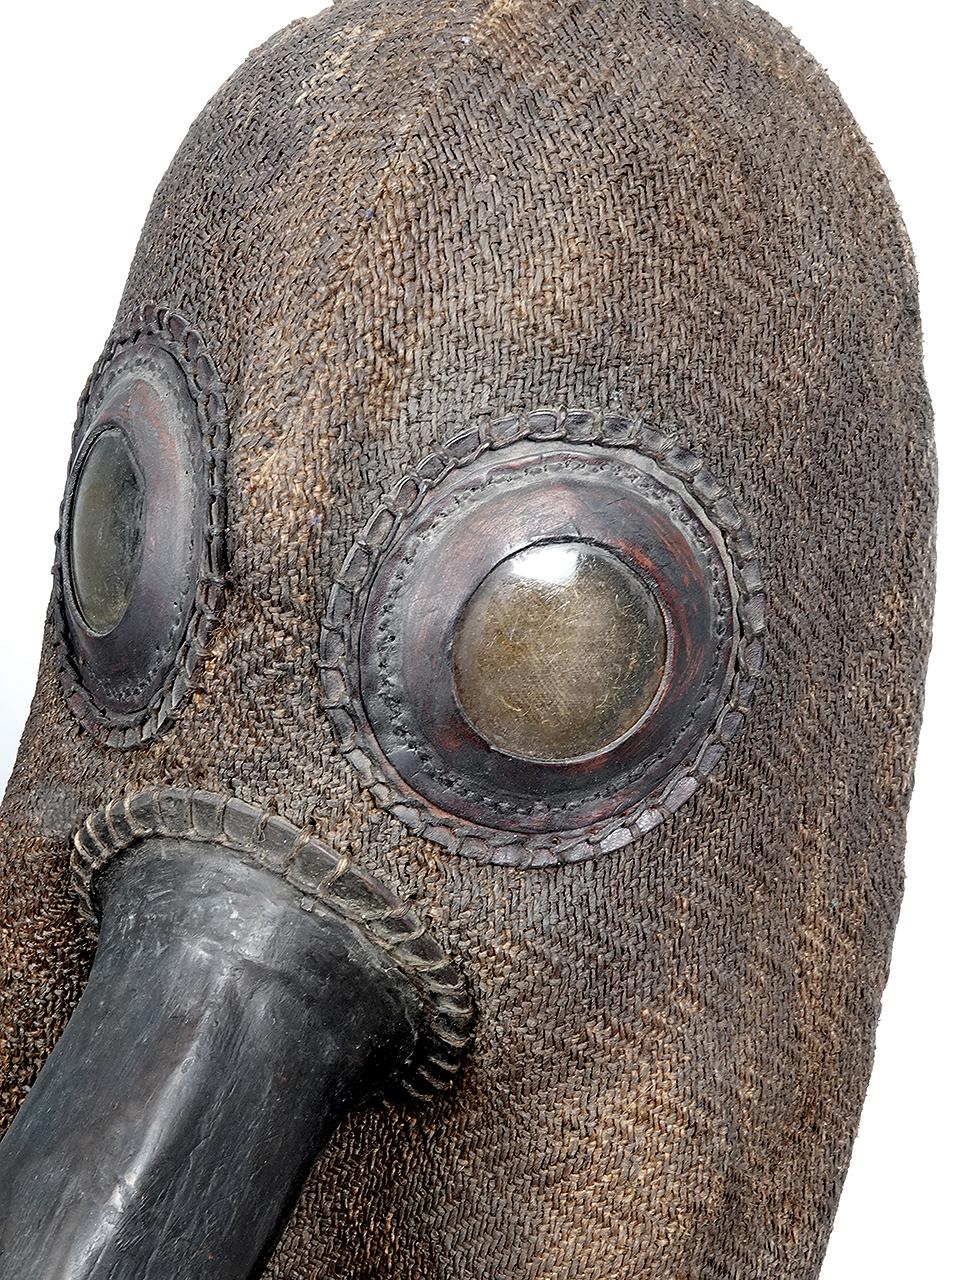 After 100's of years it's understandable that here are only 5 of original black plague helmets still in existence. All are now in Museums... but there are more museums out there than original helmets. The example pictured was a hand-made replica